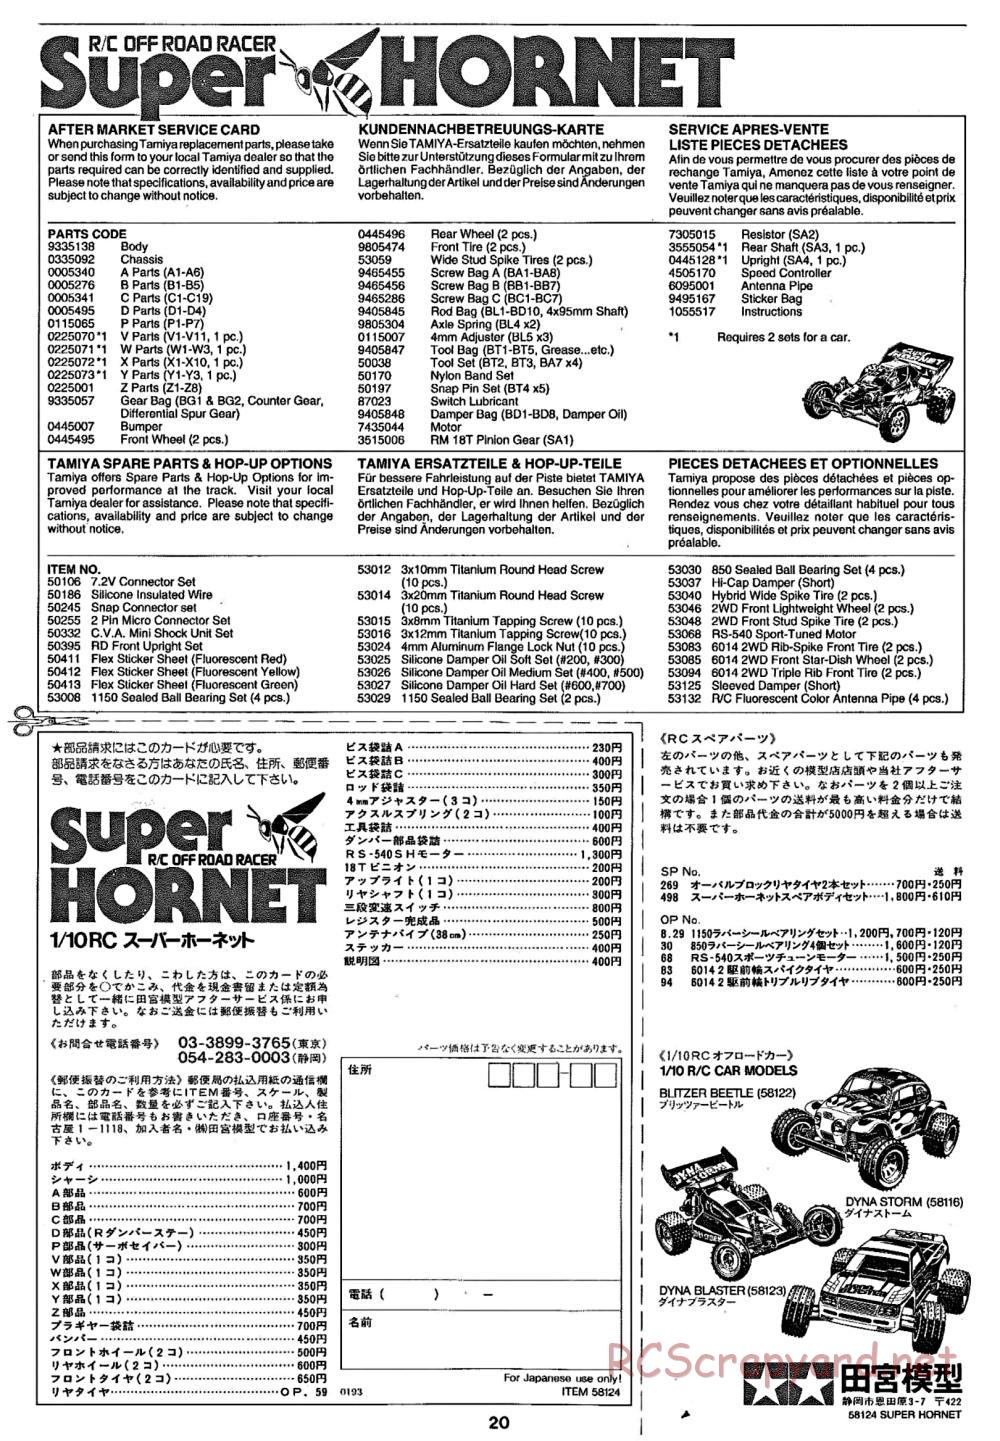 Tamiya - Super Hornet Chassis - Manual - Page 20